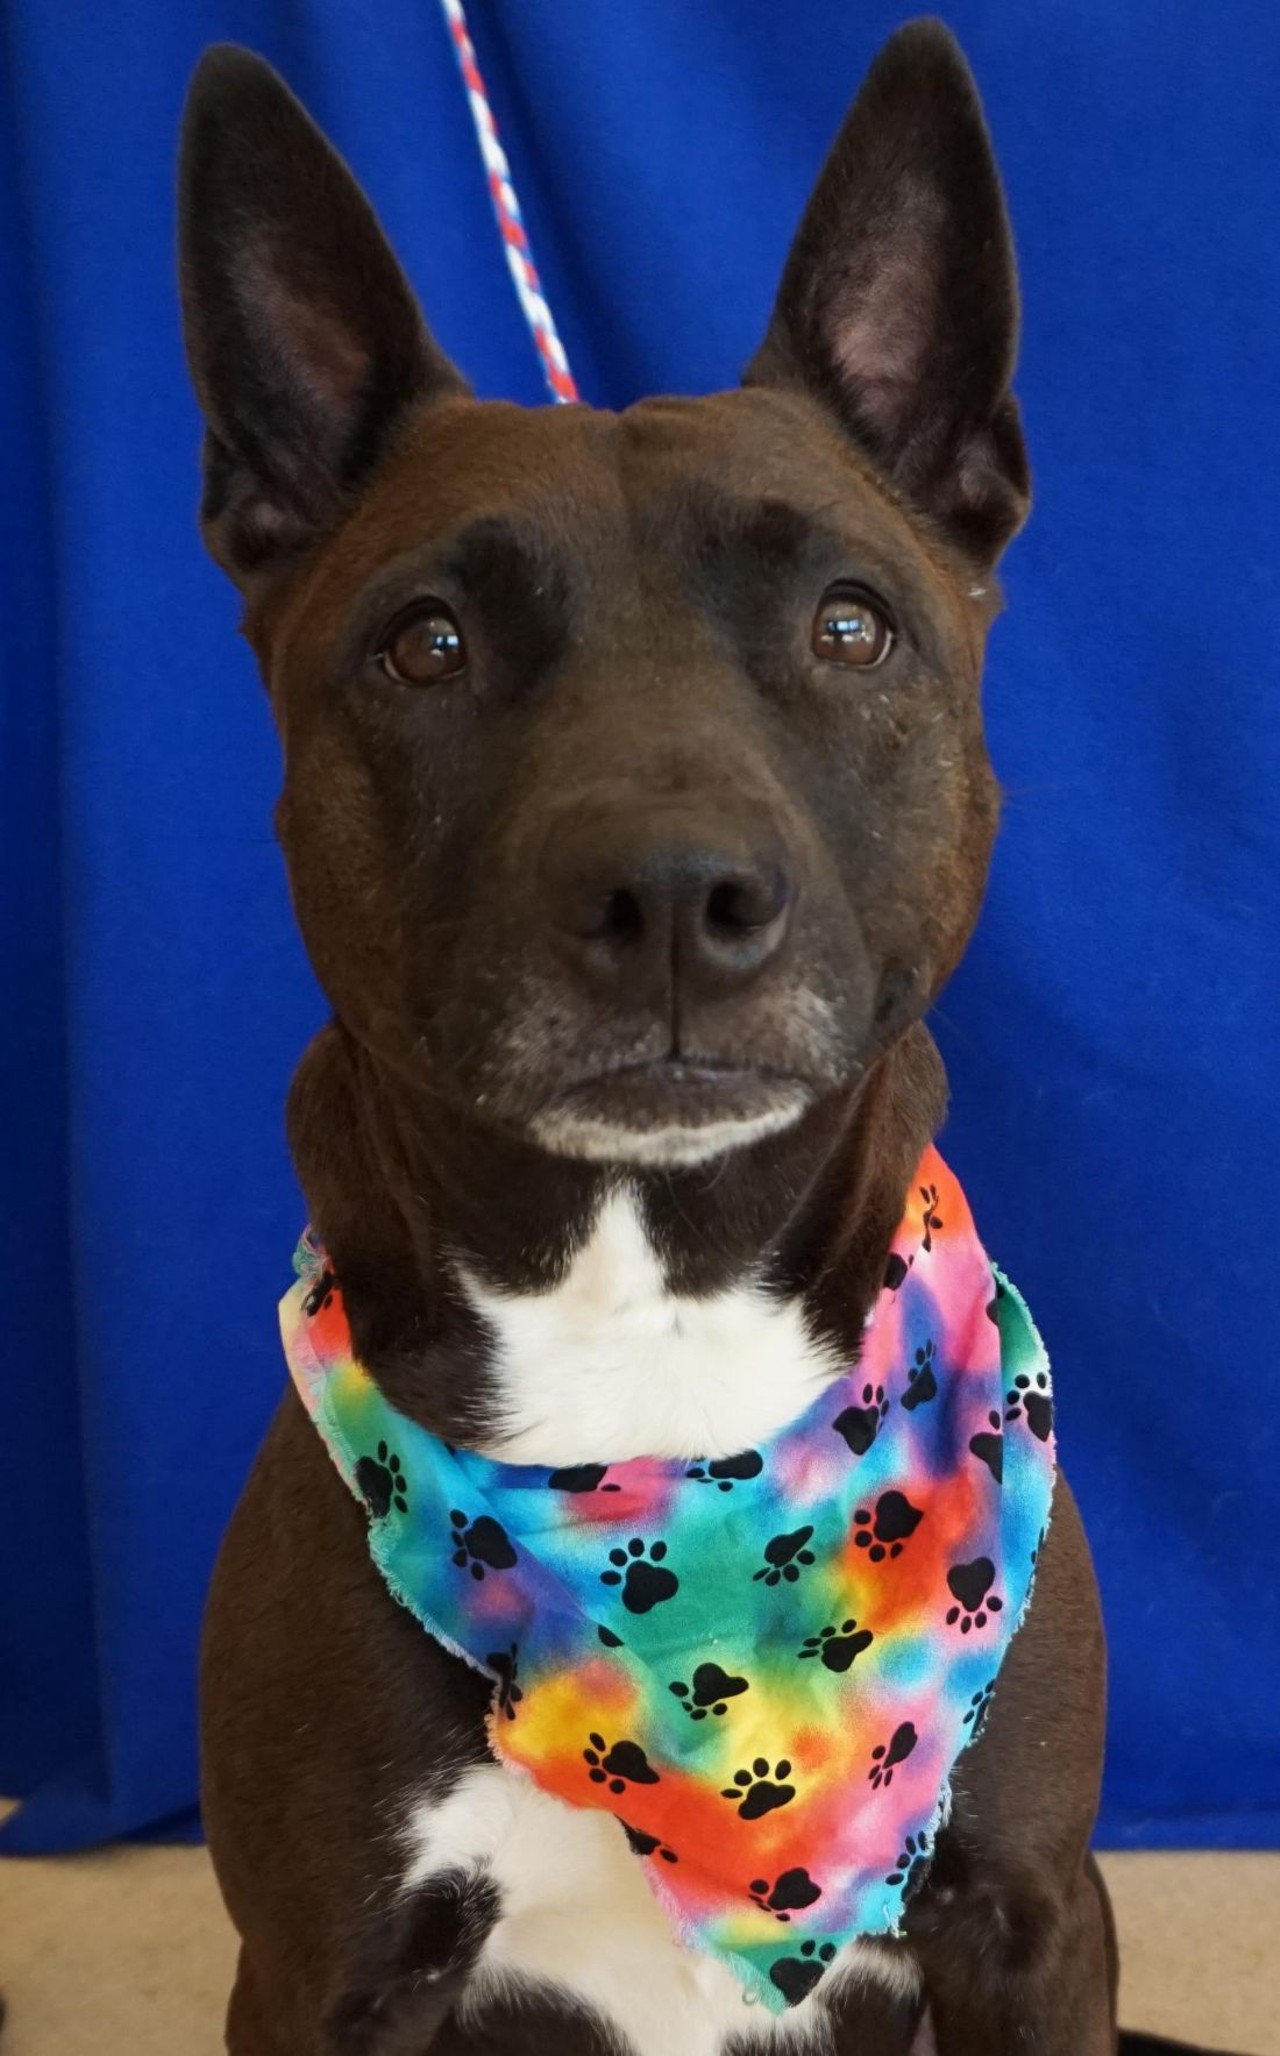 NAME: Lula
GENDER: Female
BREED: Shepherd-Terrier mix
AGE: 4 years
WEIGHT: 54 pounds
SPECIAL CONSIDERATIONS: None
REASON I CAME TO MHS: Agency transfer
LOCATION: Rochester Hills Center for Animal Care
ID NUMBER: 867924